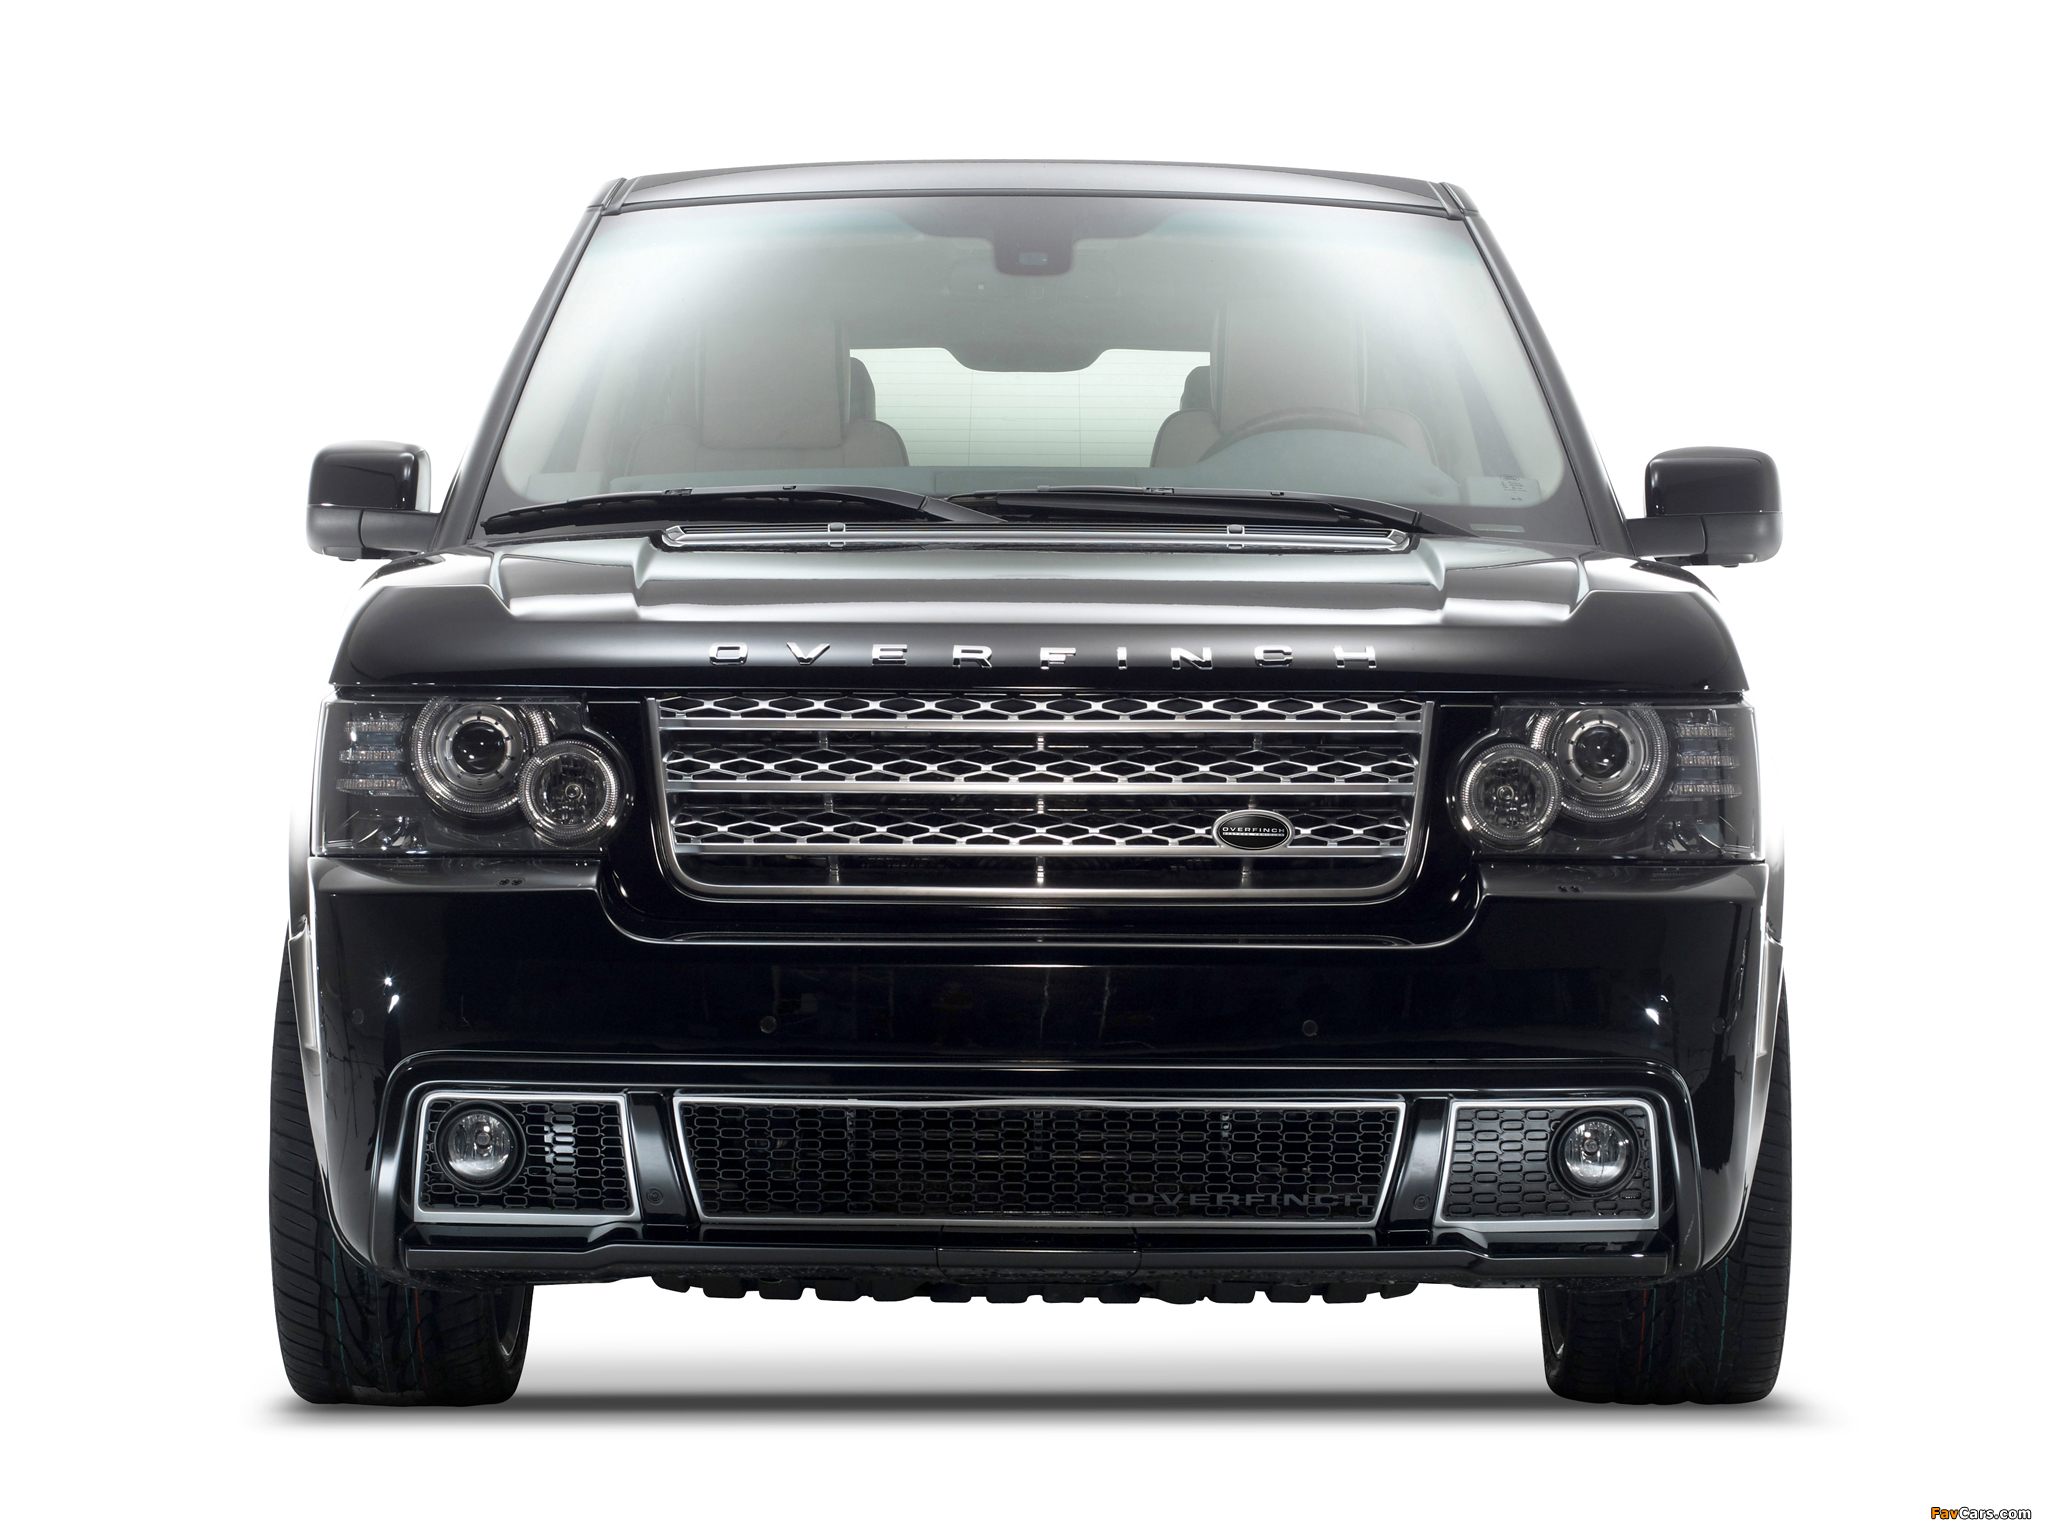 Overfinch Range Rover Supercharged Royale (L322) 2009 pictures (2048 x 1536)